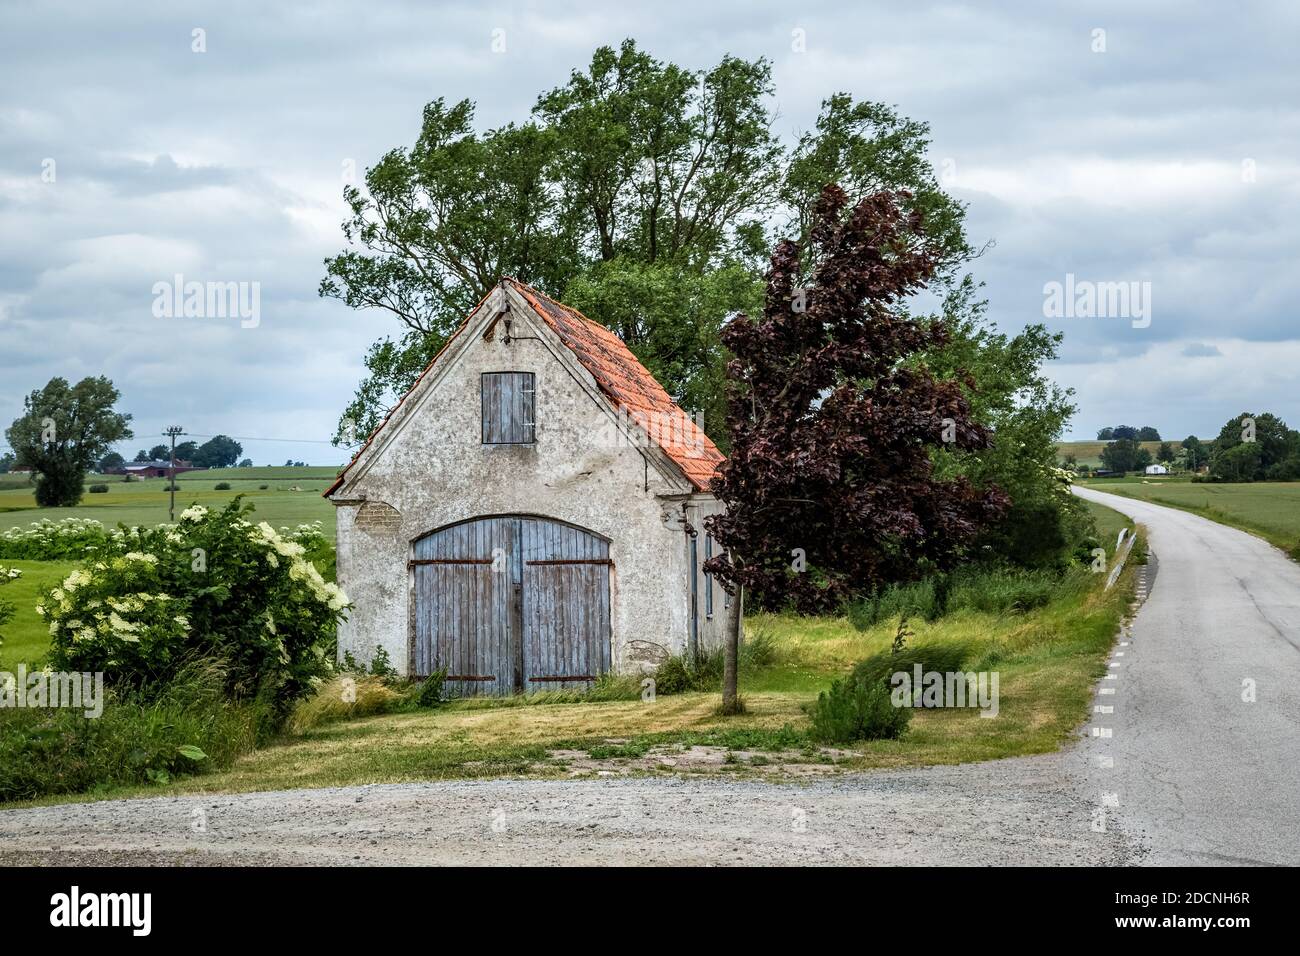 Old weathered brick shed with plaster peeling off next to a small country road in Valleberga, Skane, Southern Sweden. Stock Photo